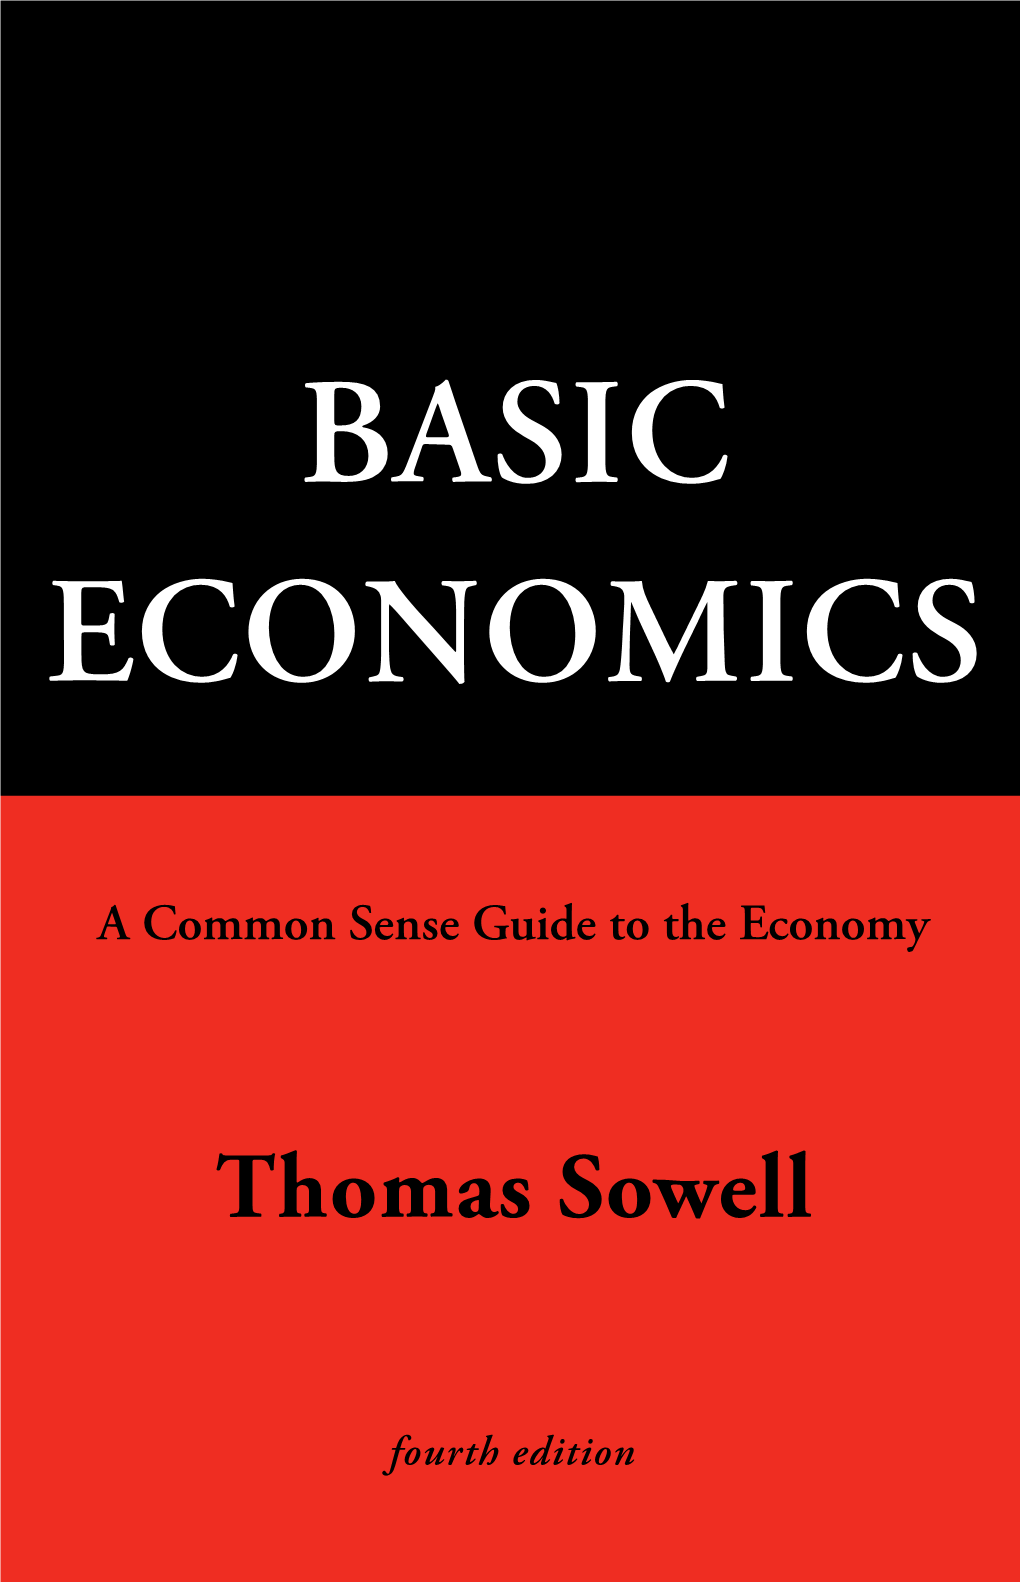 BASIC ECONOMICS Has Been Added to the Chapter on Government and Big Business, Hy Are Homeless People Sleeping on The